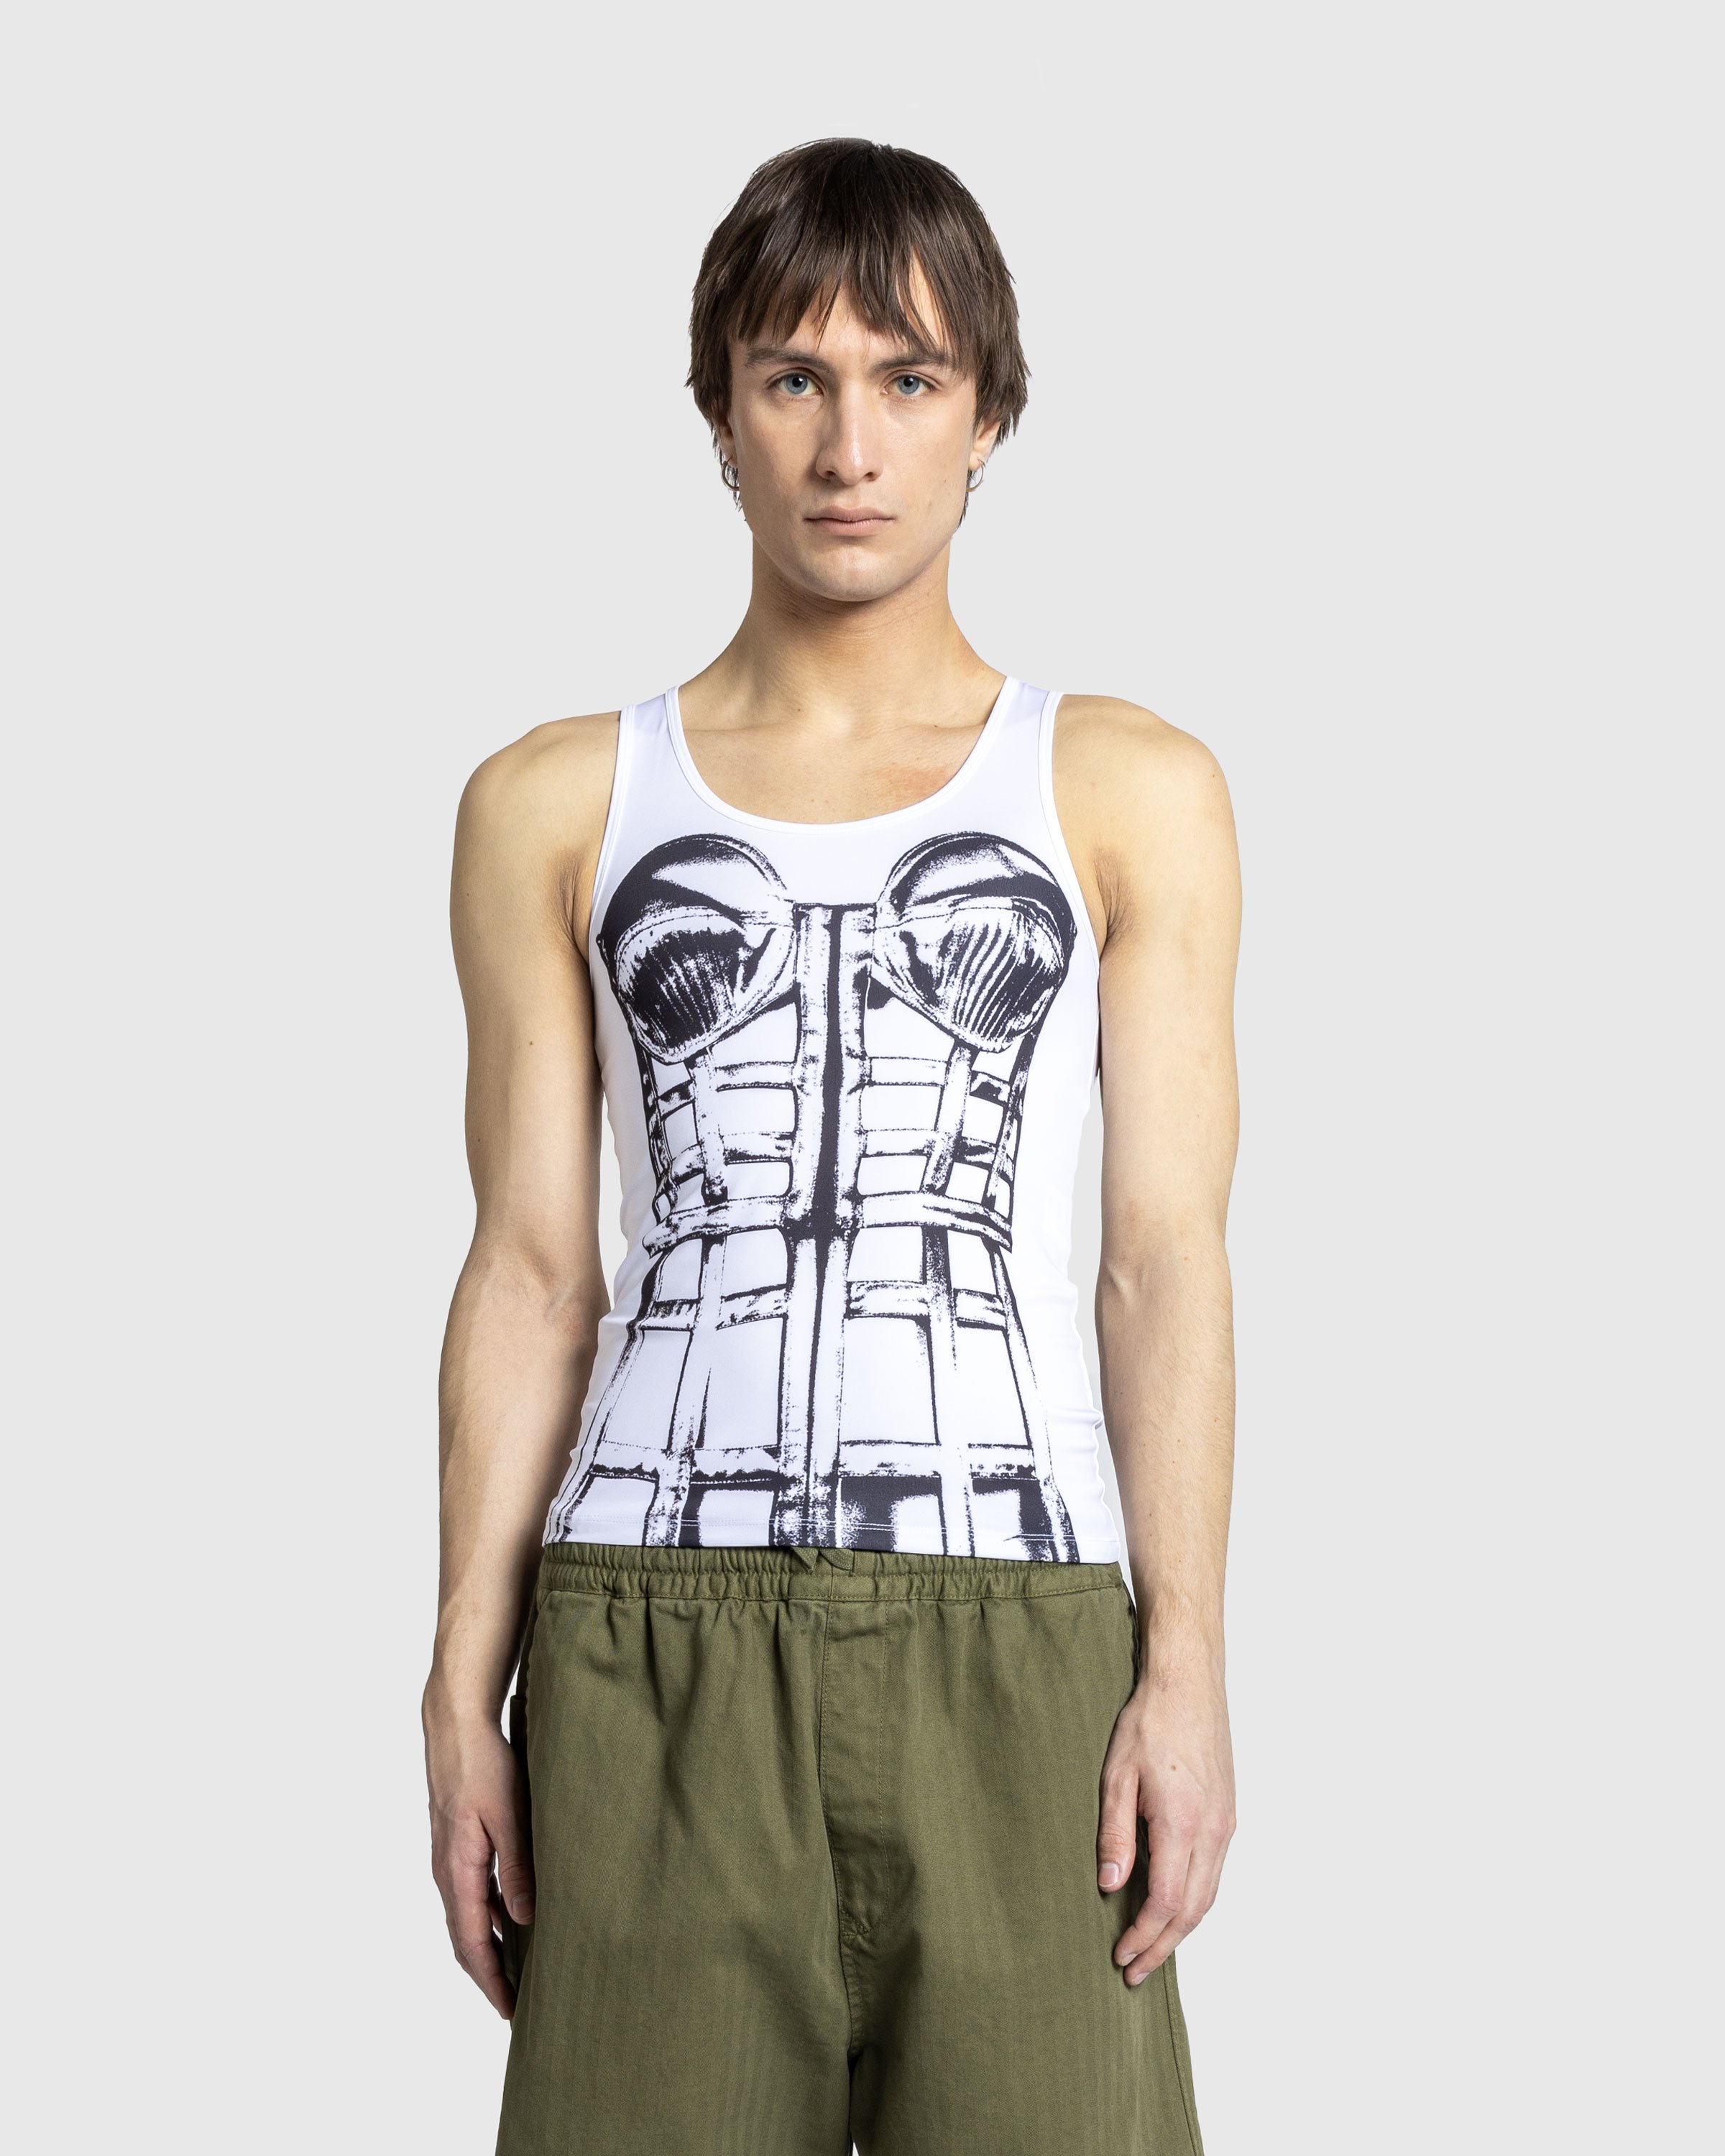 Jean Paul Gaultier - Jersey Top Printed "Cage Trompe L'Œil" White/Black - Clothing - White - Image 2